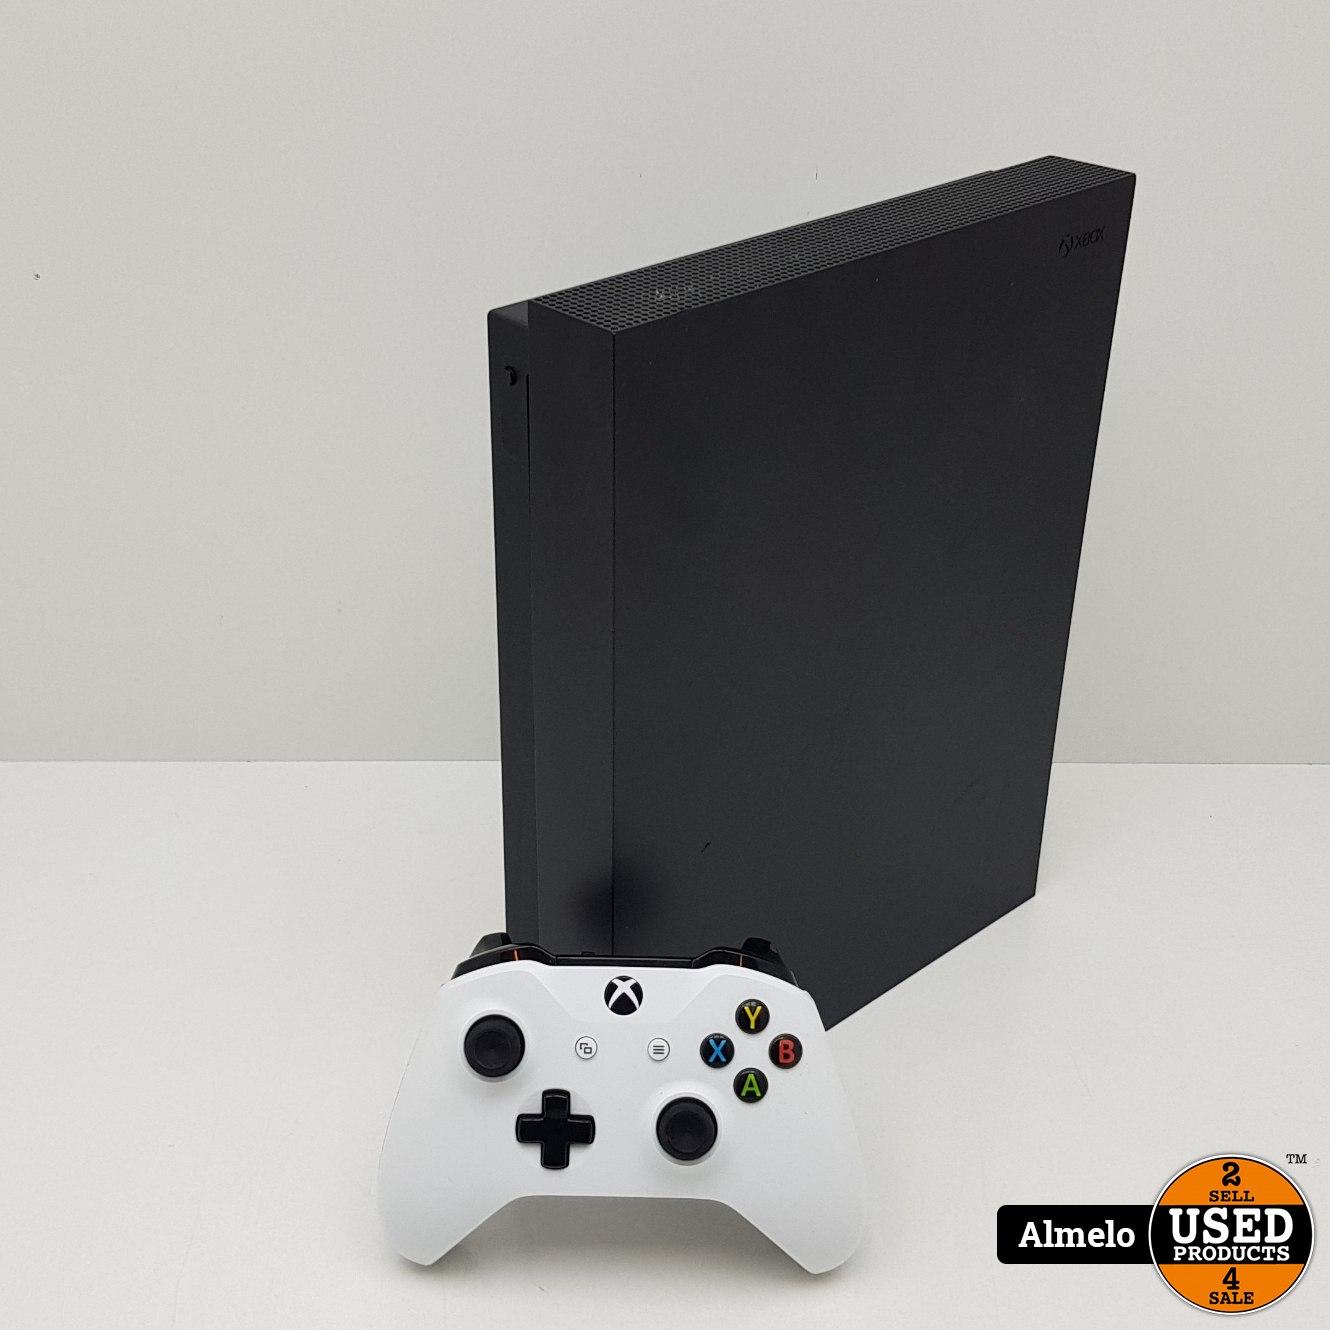 Haan fragment deze Xbox one X 1TB - Used Products Almelo